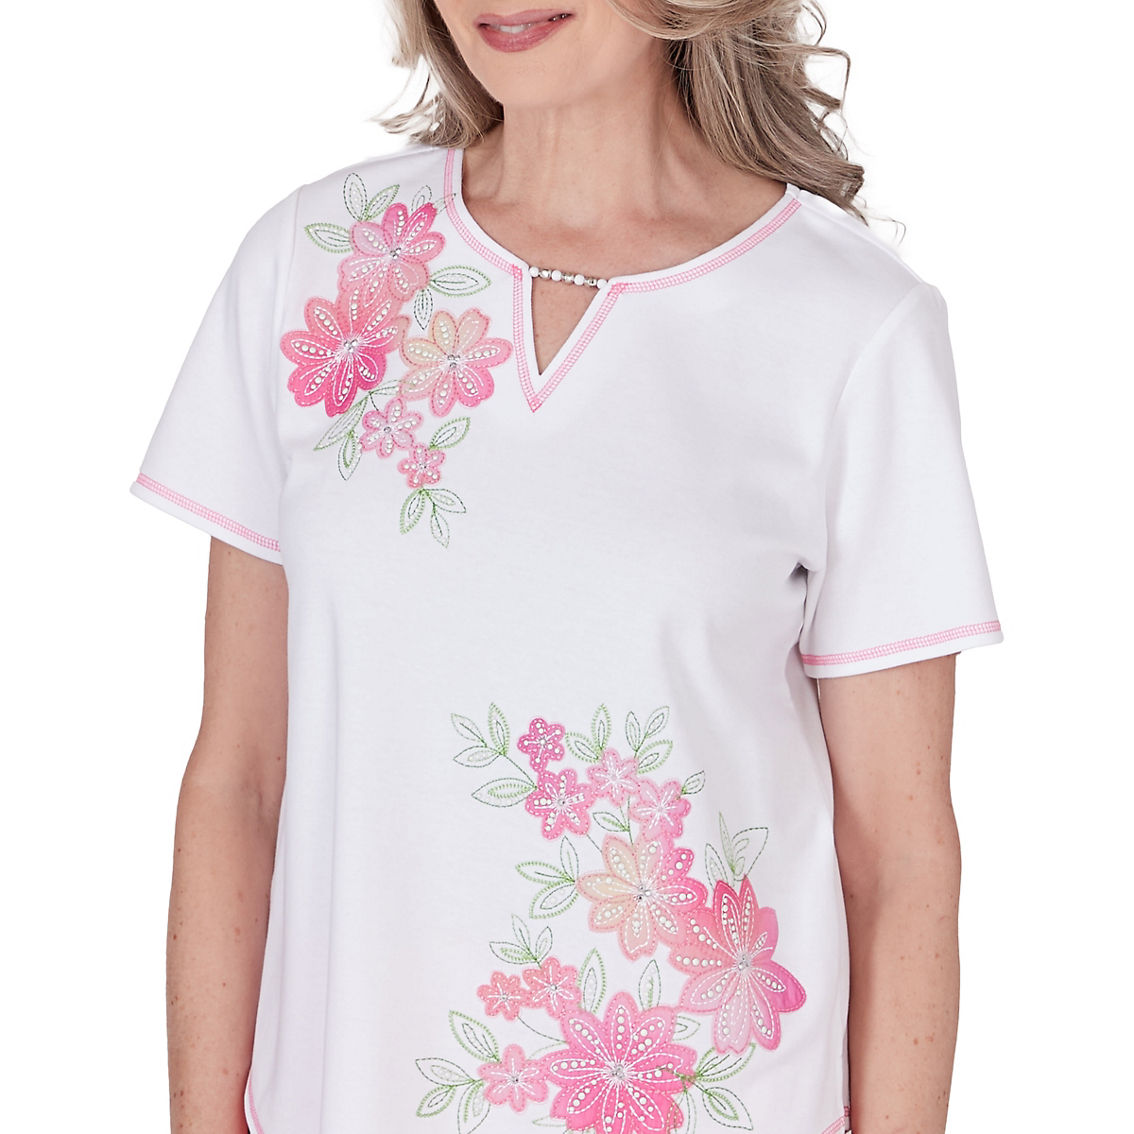 Alfred Dunner Petite Miami Beach Women's Short Sleeve Floral Applique Top - Image 5 of 5